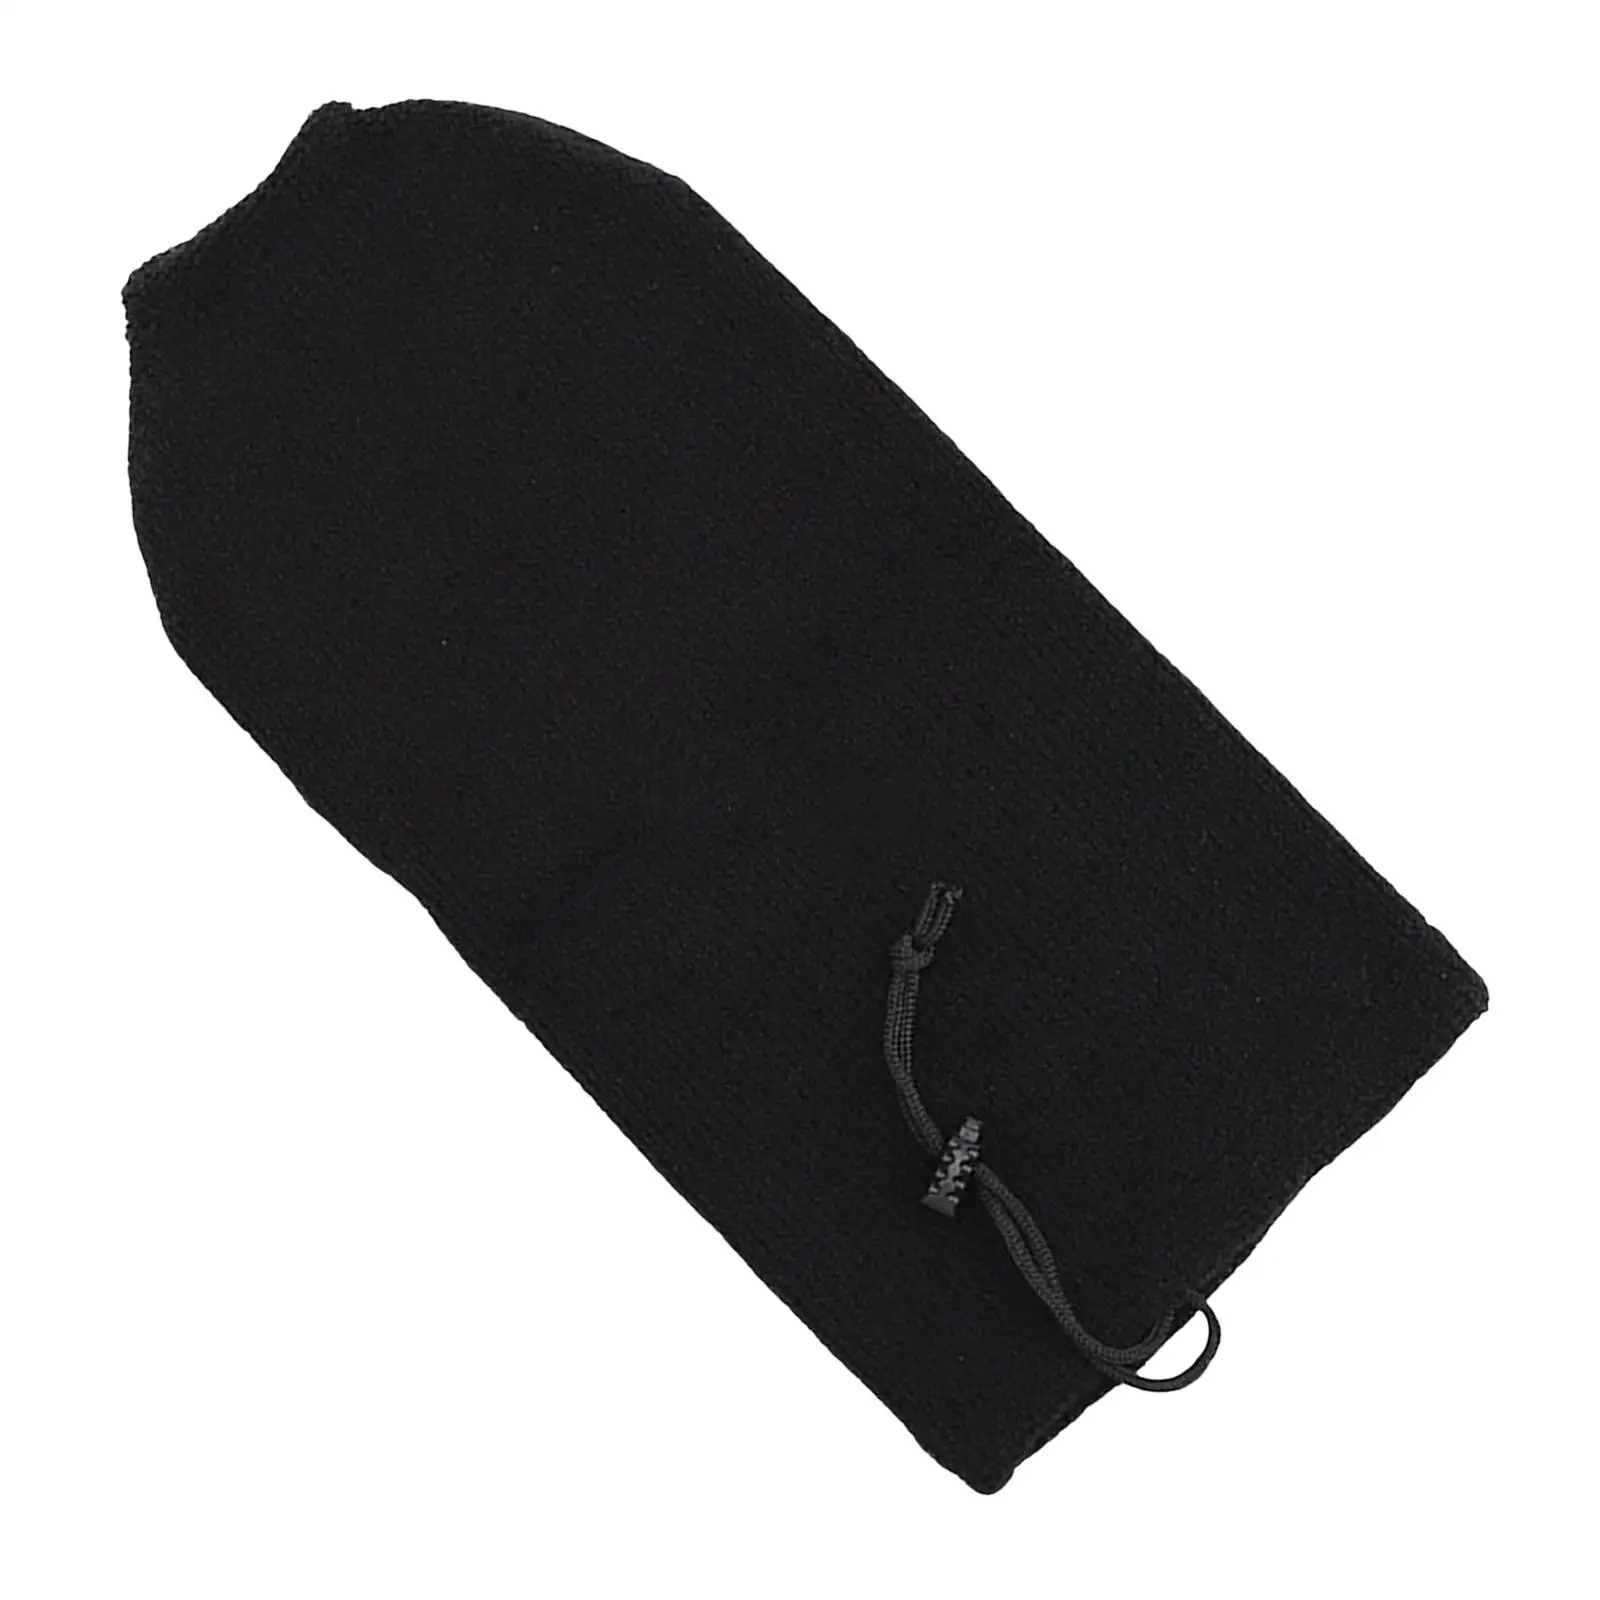 Boat Cover Easy to Use Protective Sleeve for Marine Boat Yachts